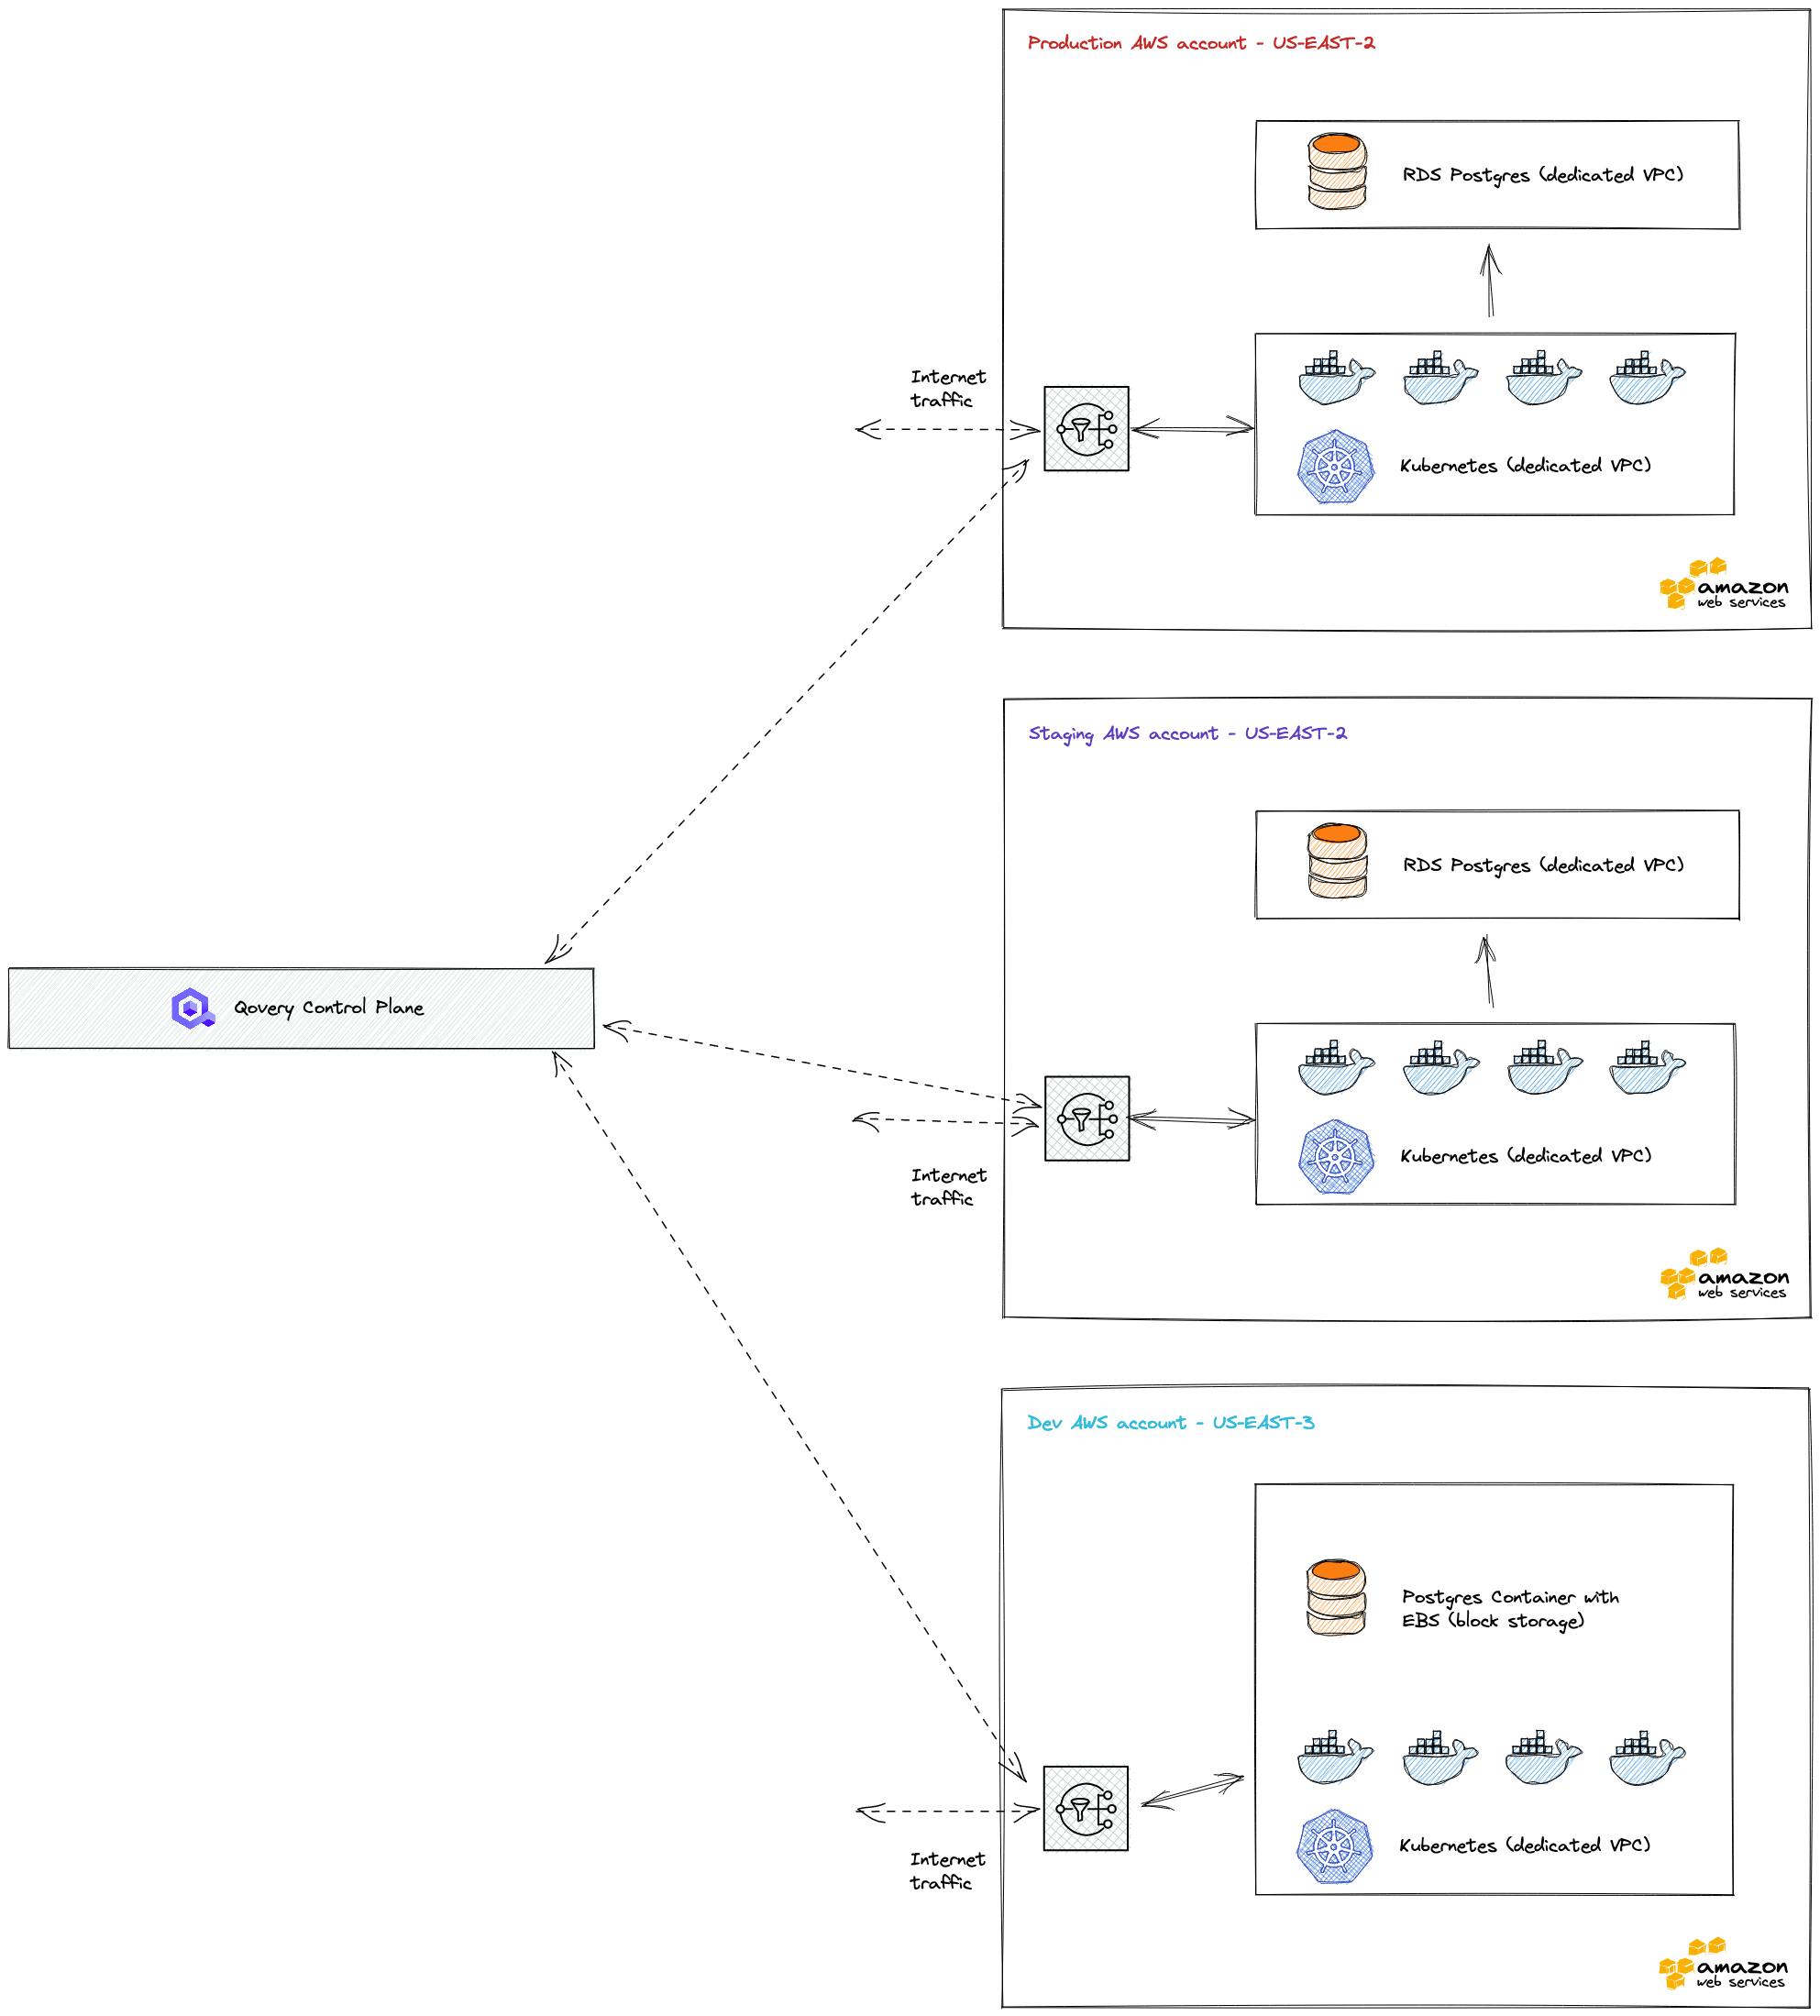 Full Production, Staging and Dev environments on AWS with Kubernetes and RDS